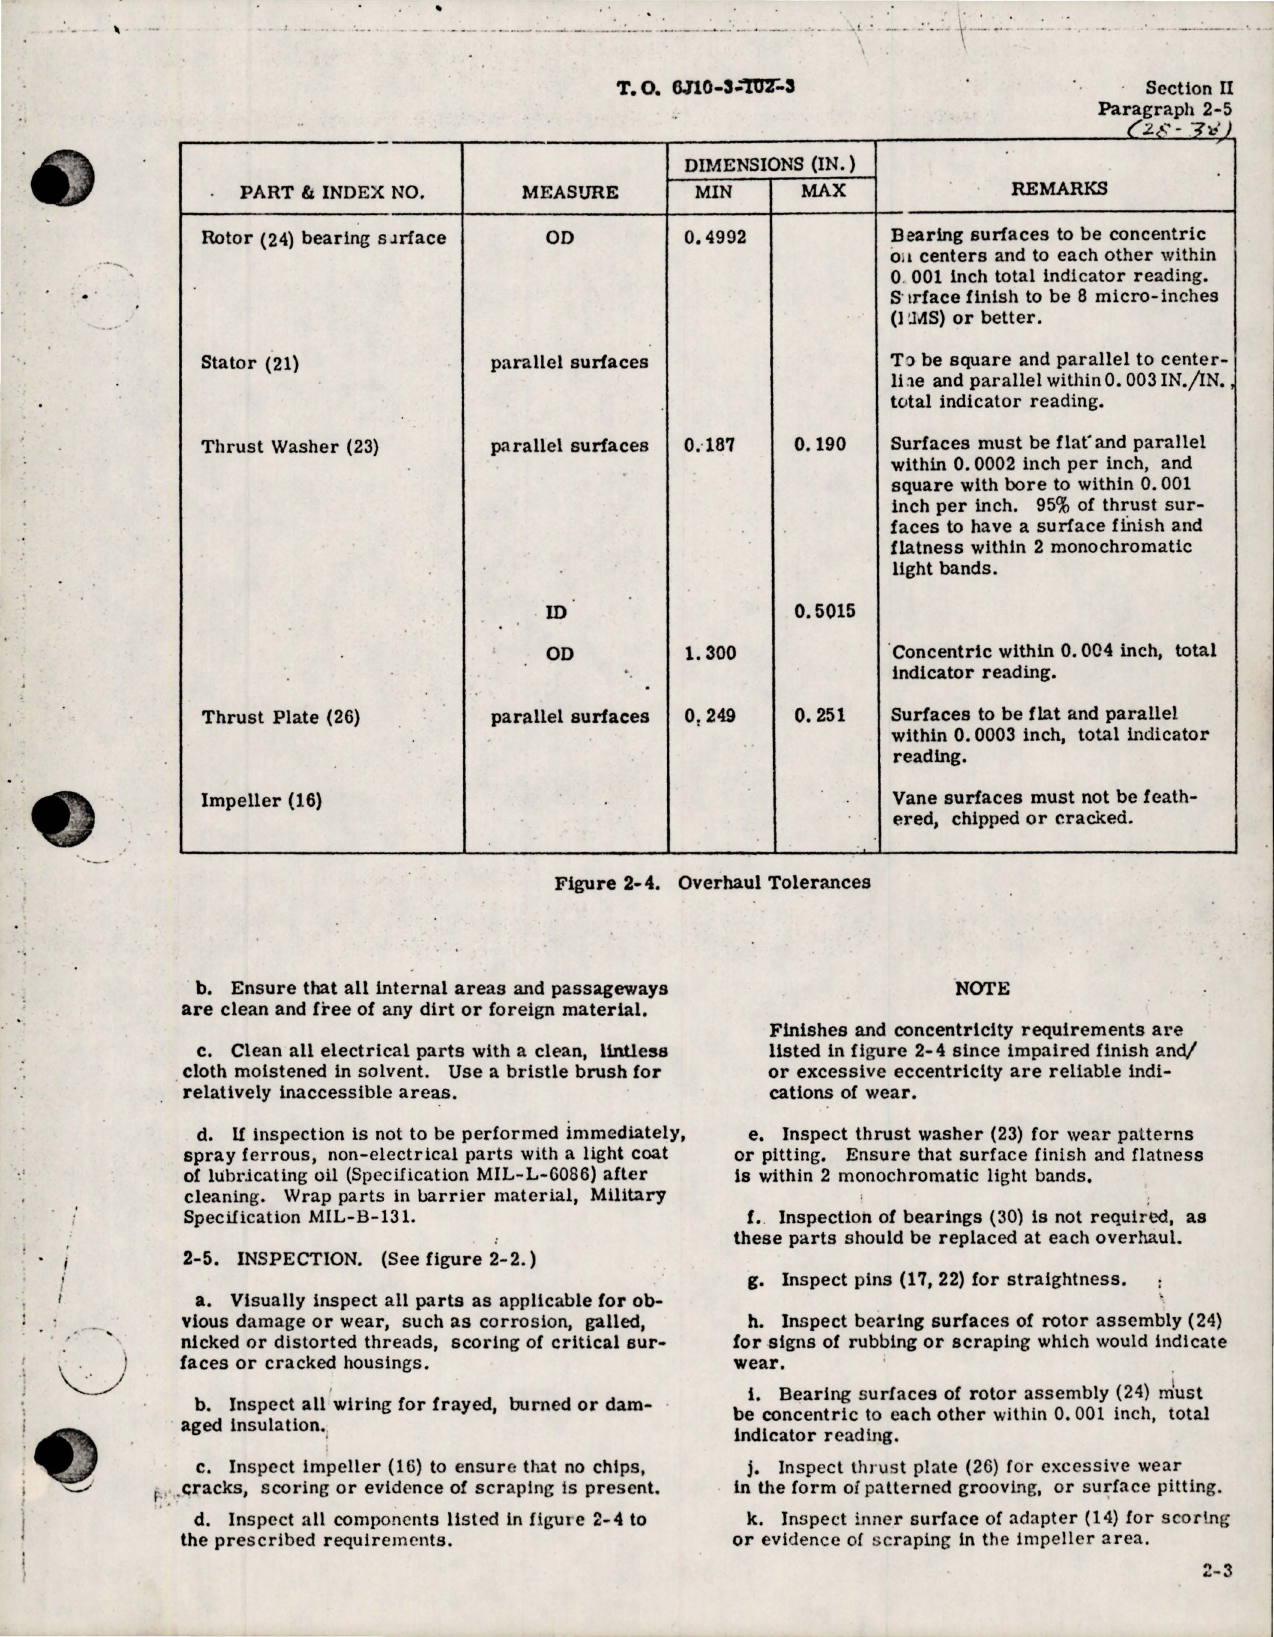 Sample page 7 from AirCorps Library document: Overhaul Manual for Fuel Booster Pump Assembly - Parts 60-371A, 60-371B, and 60-371C